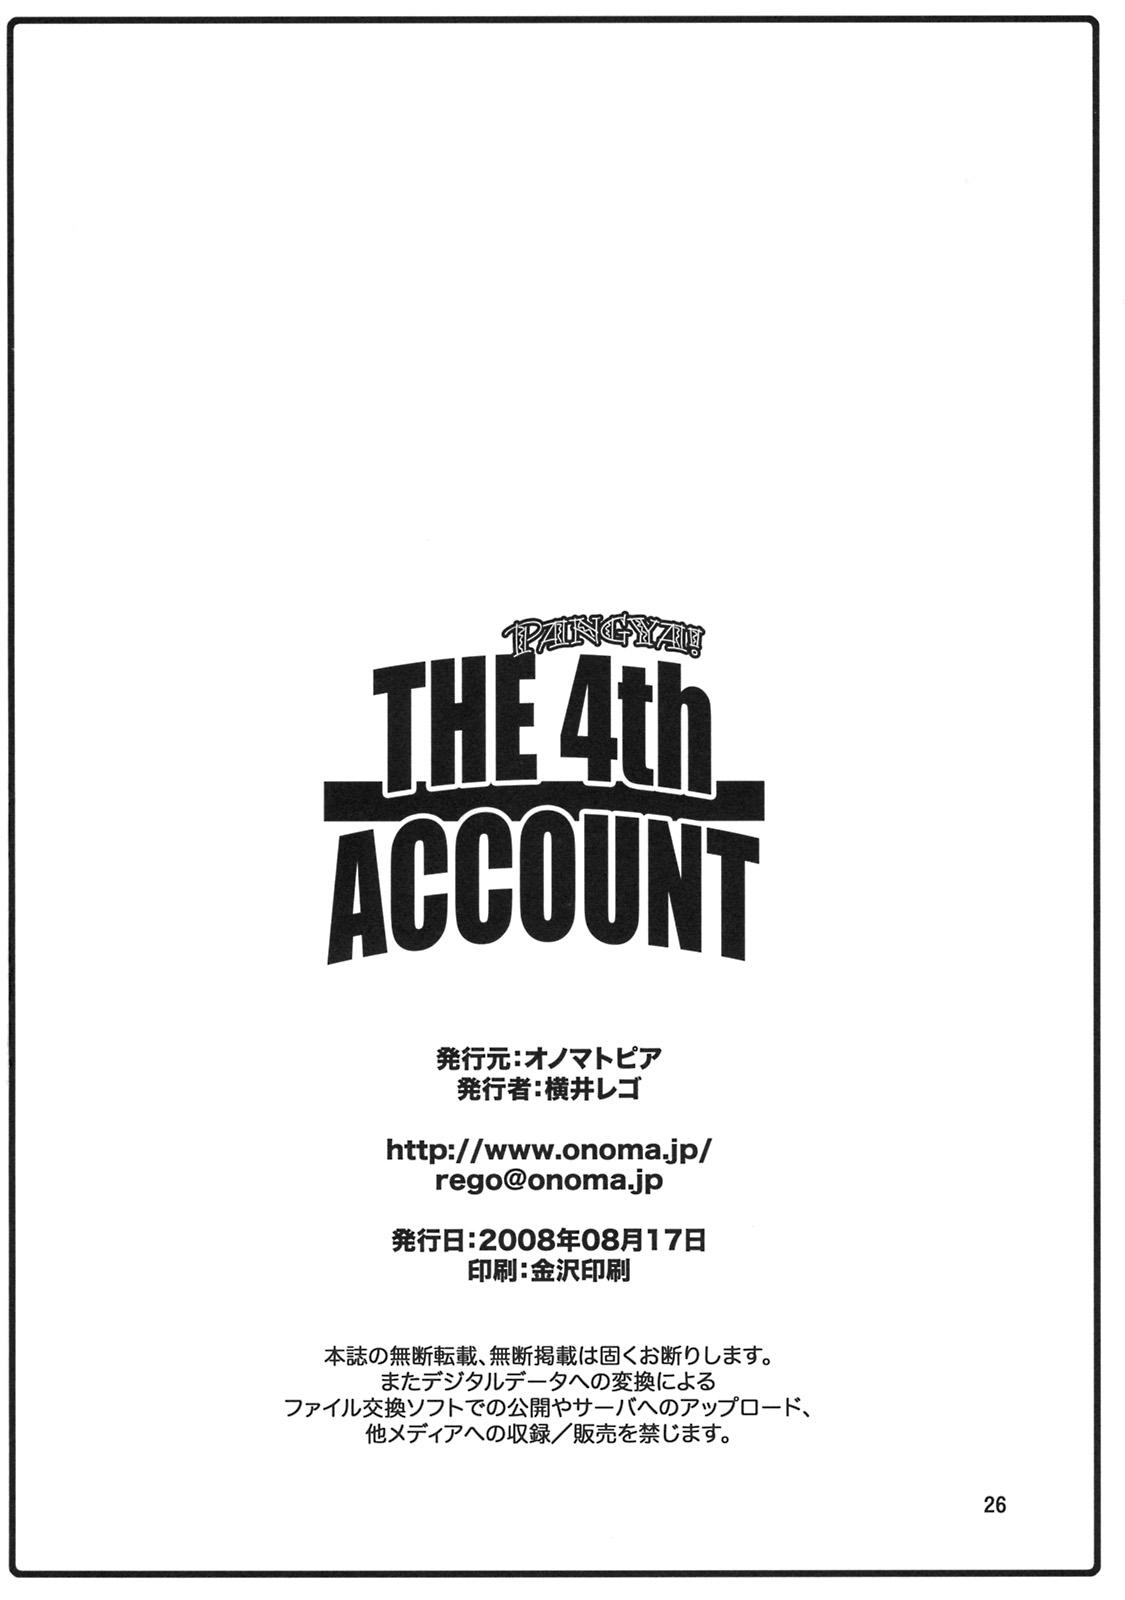 THE 4th ACCOUNT 24